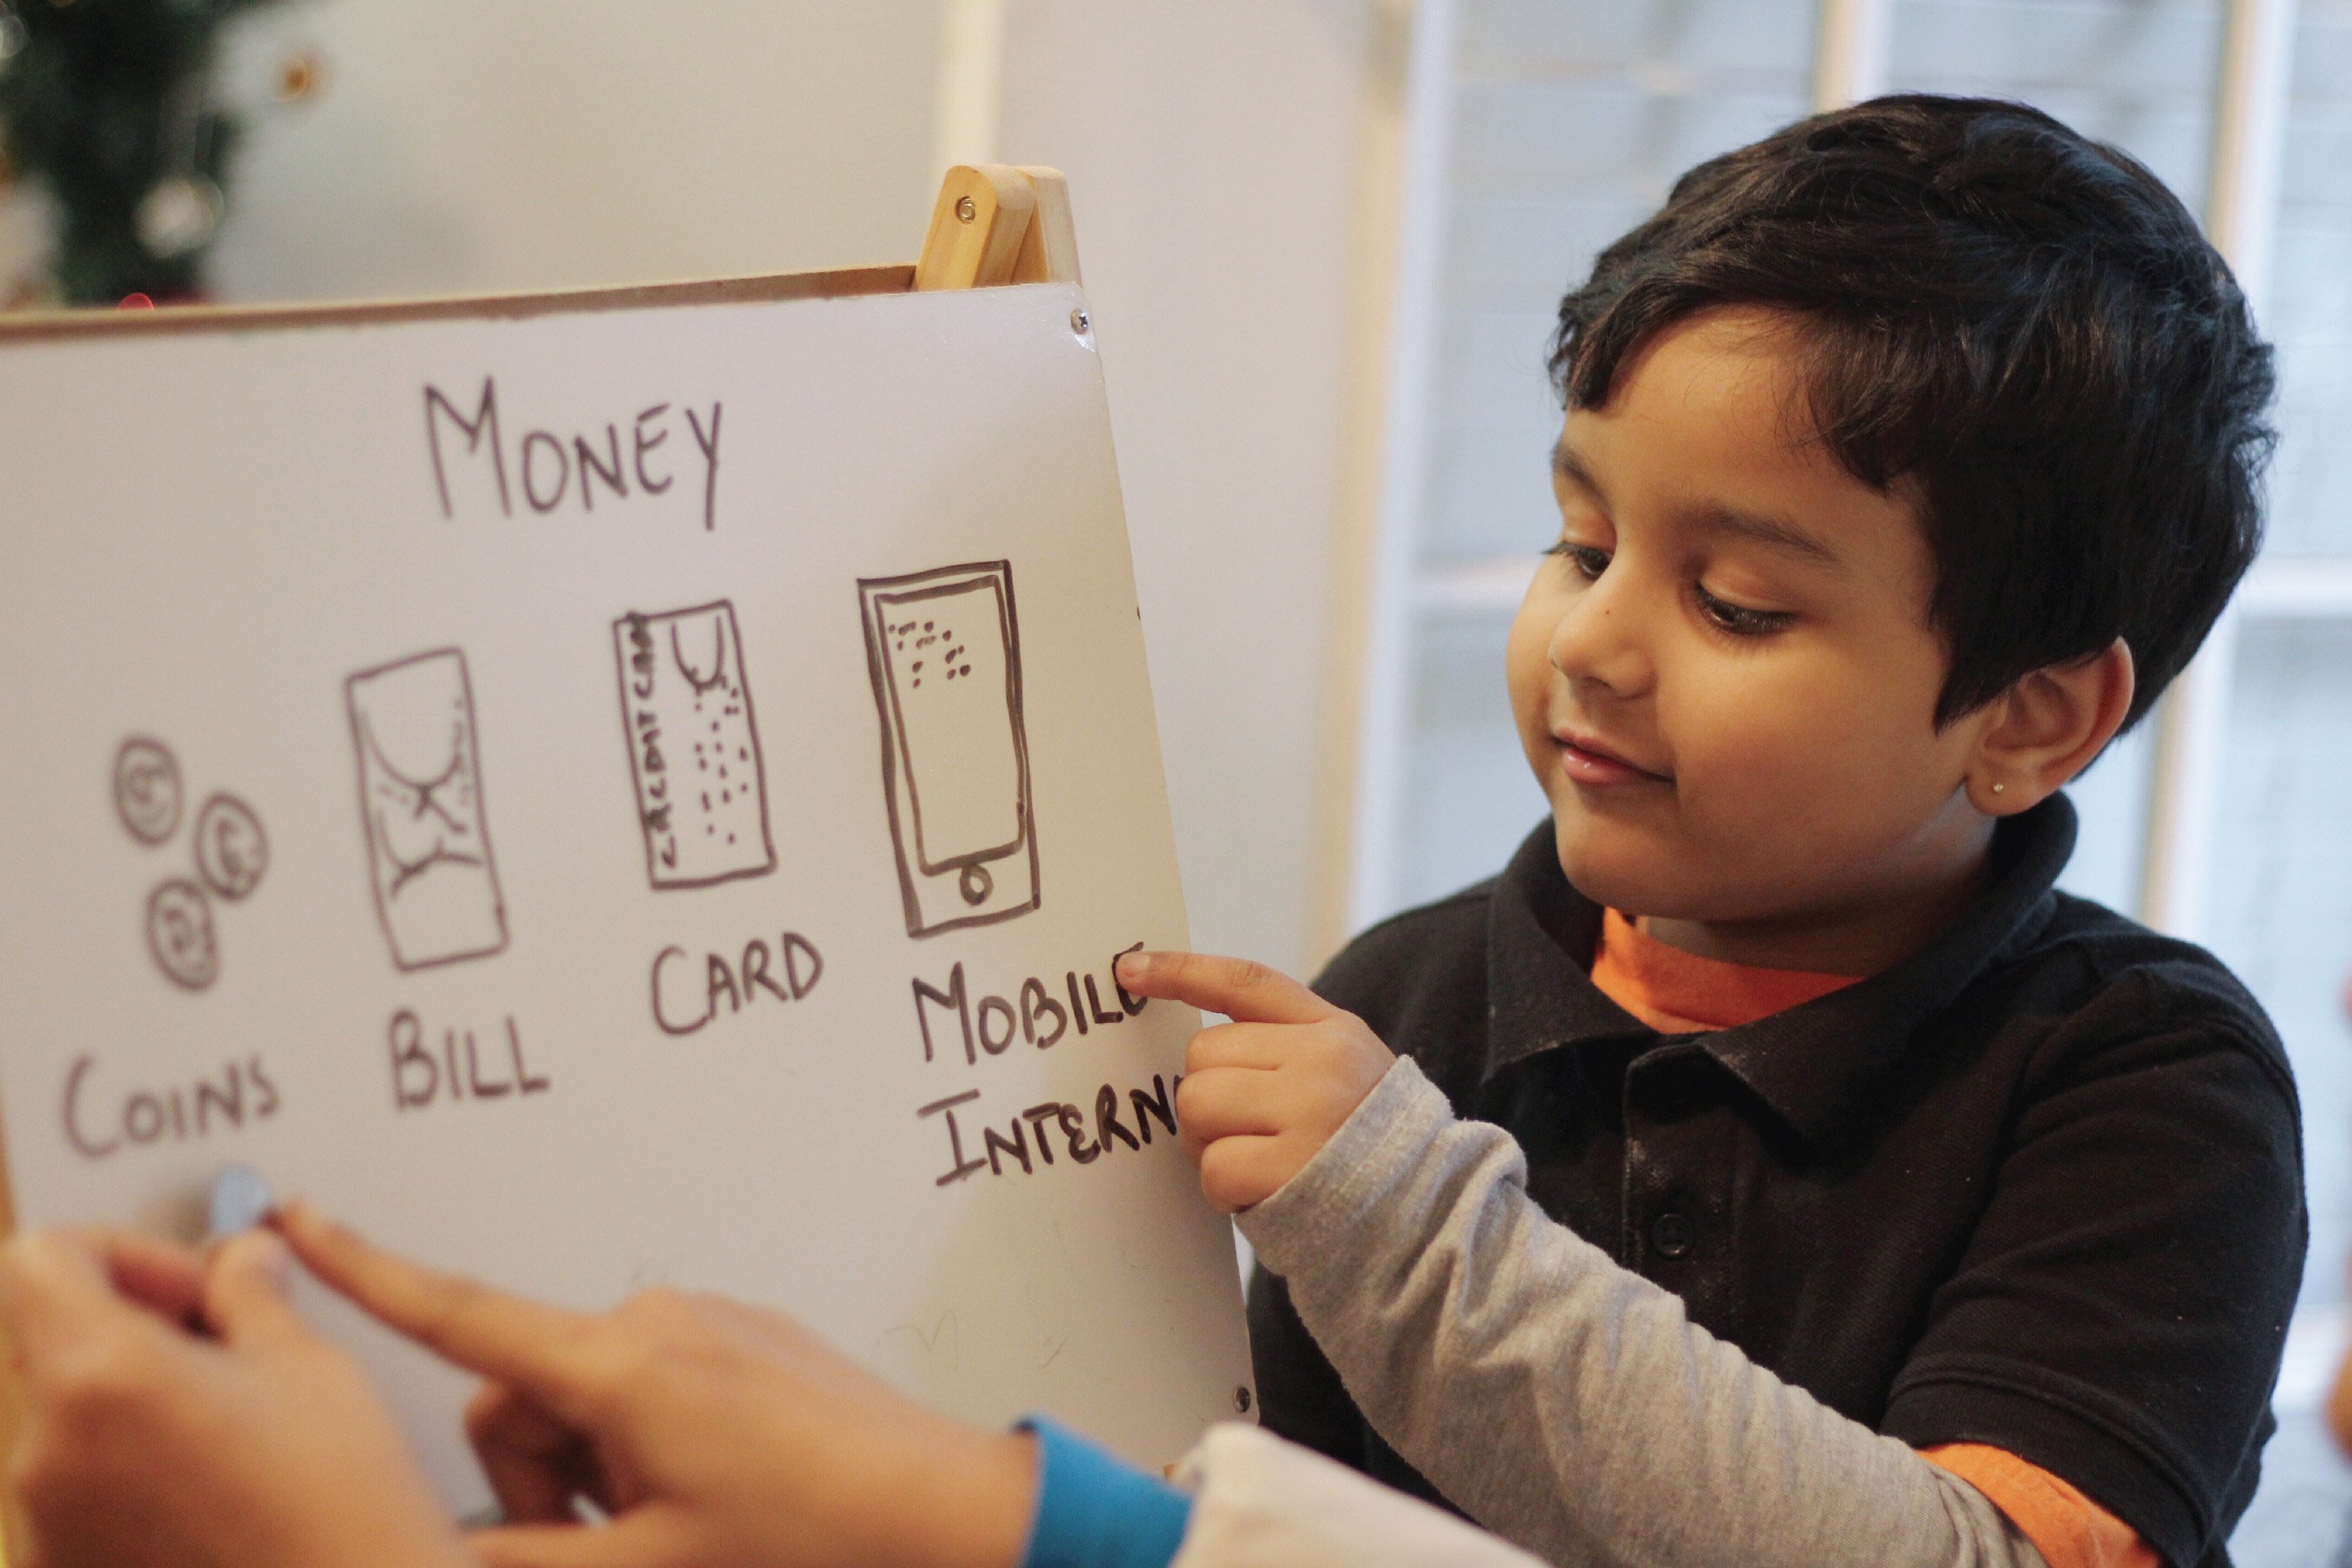 Child pointing to a board with types of currency on it